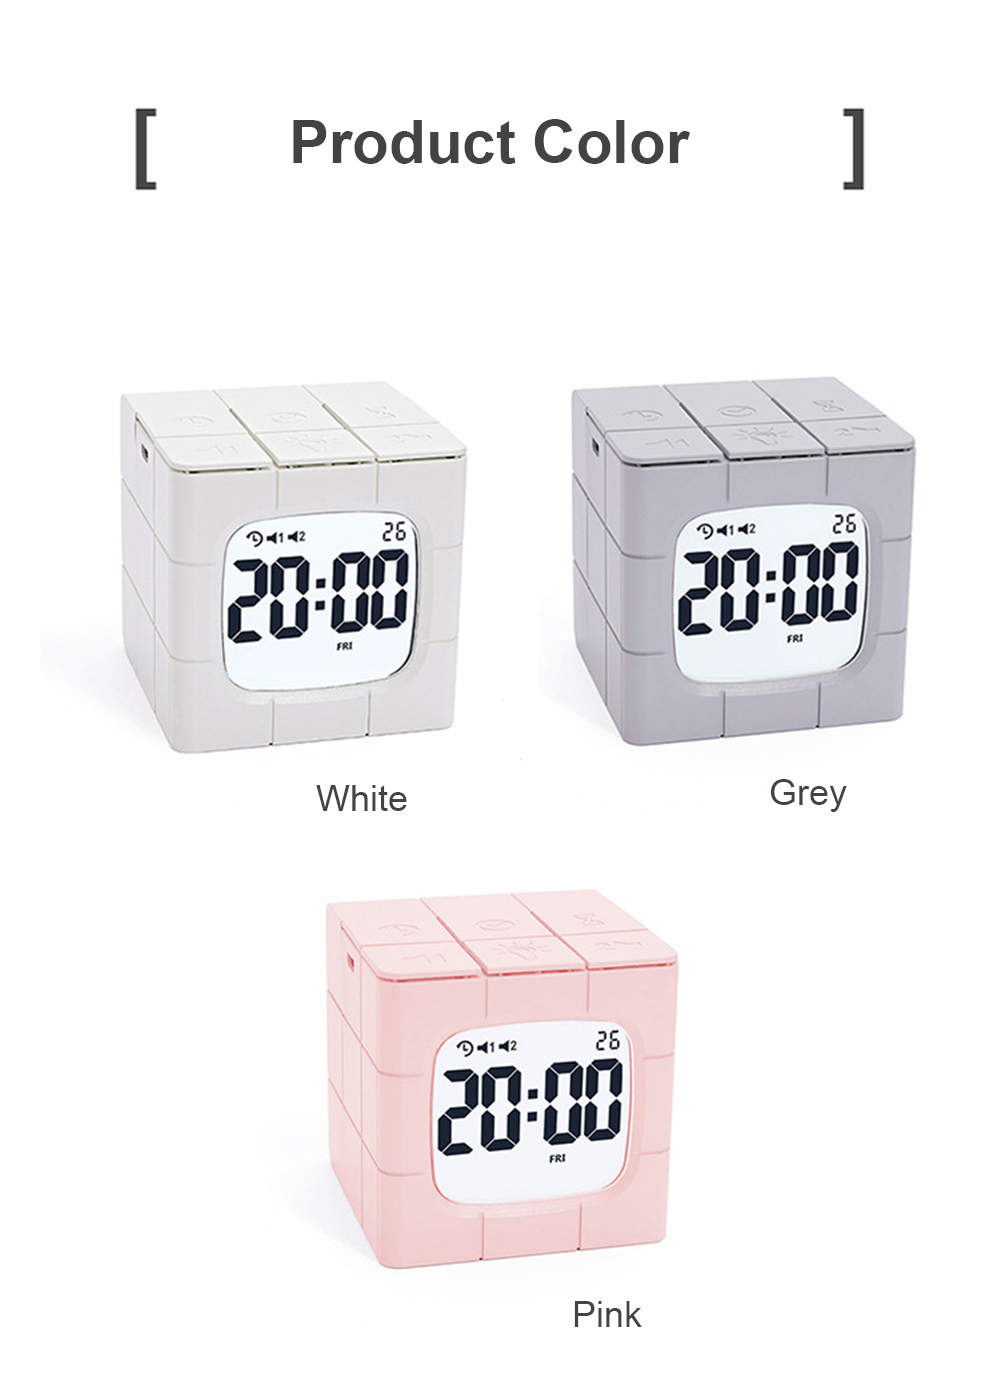 Magic-Cube-Alarm-Clock-LED-Multifunctional-Time-Manager-USB-Charging-Alarm-Clock-Timer-Study-Cooking-1773005-16